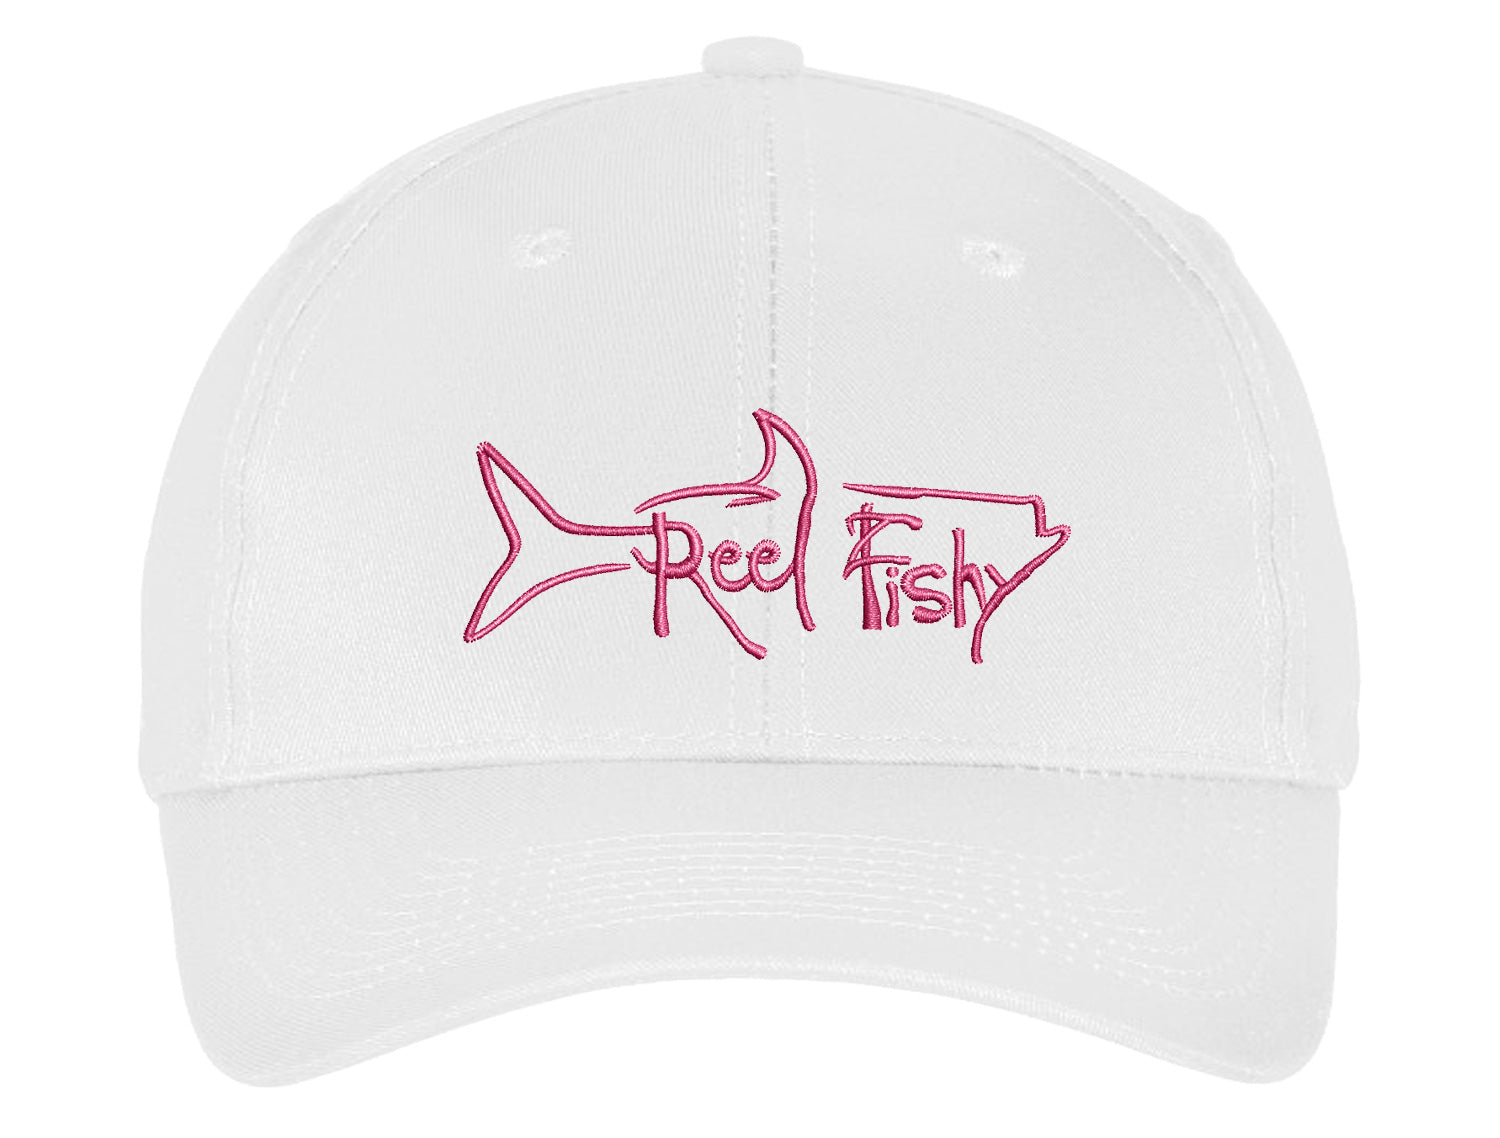  Daiwa Fishing Cap Trucker Embroidered Pink and White Logo :  Sports & Outdoors